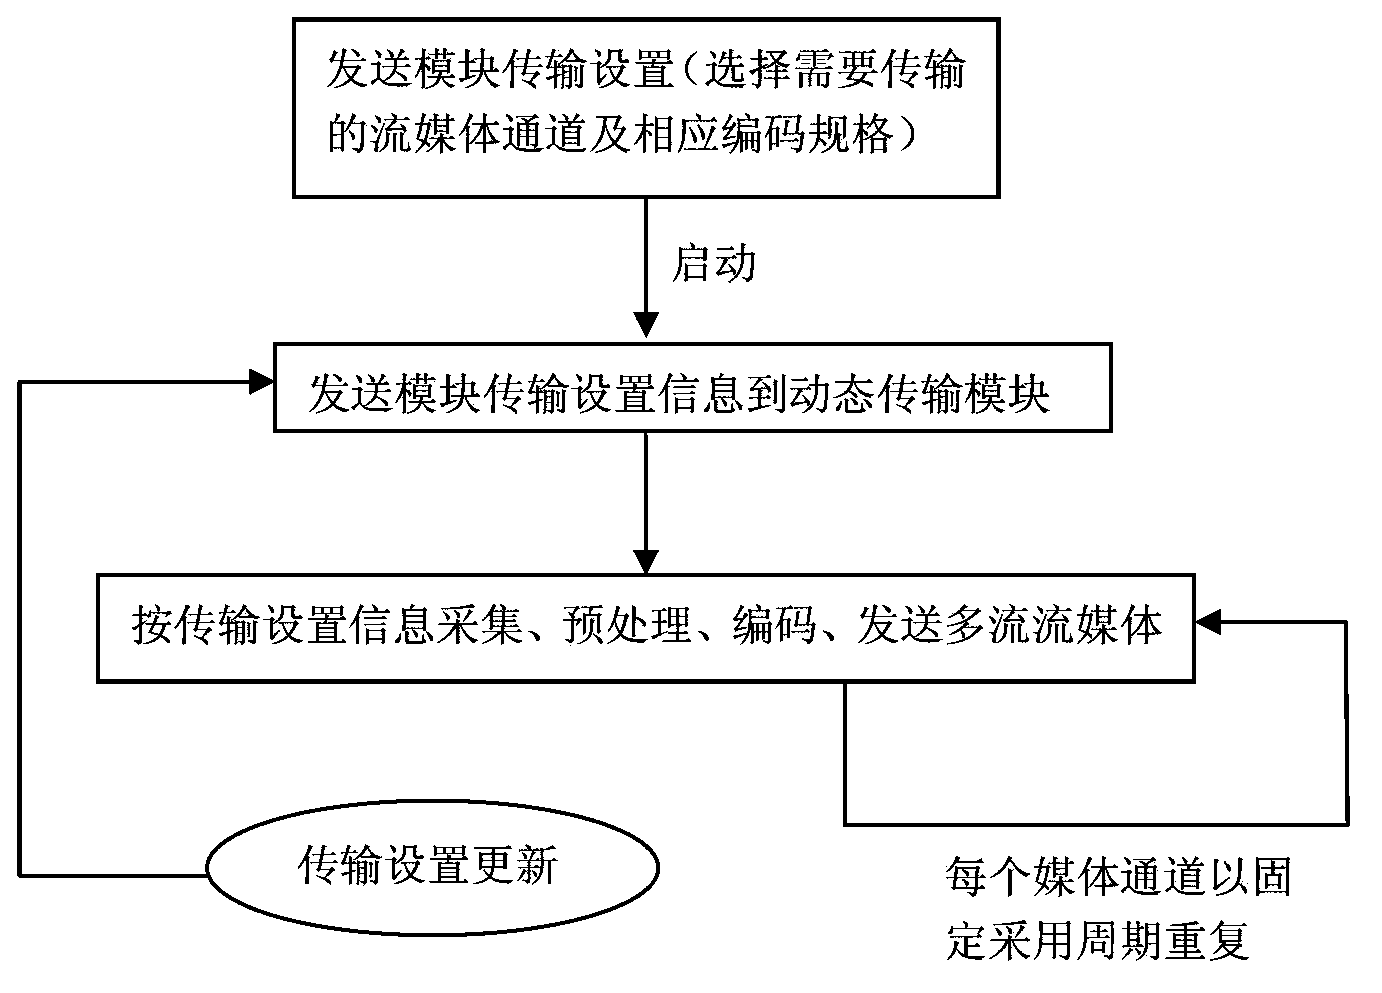 System for supporting multithread streaming media dynamic transmission